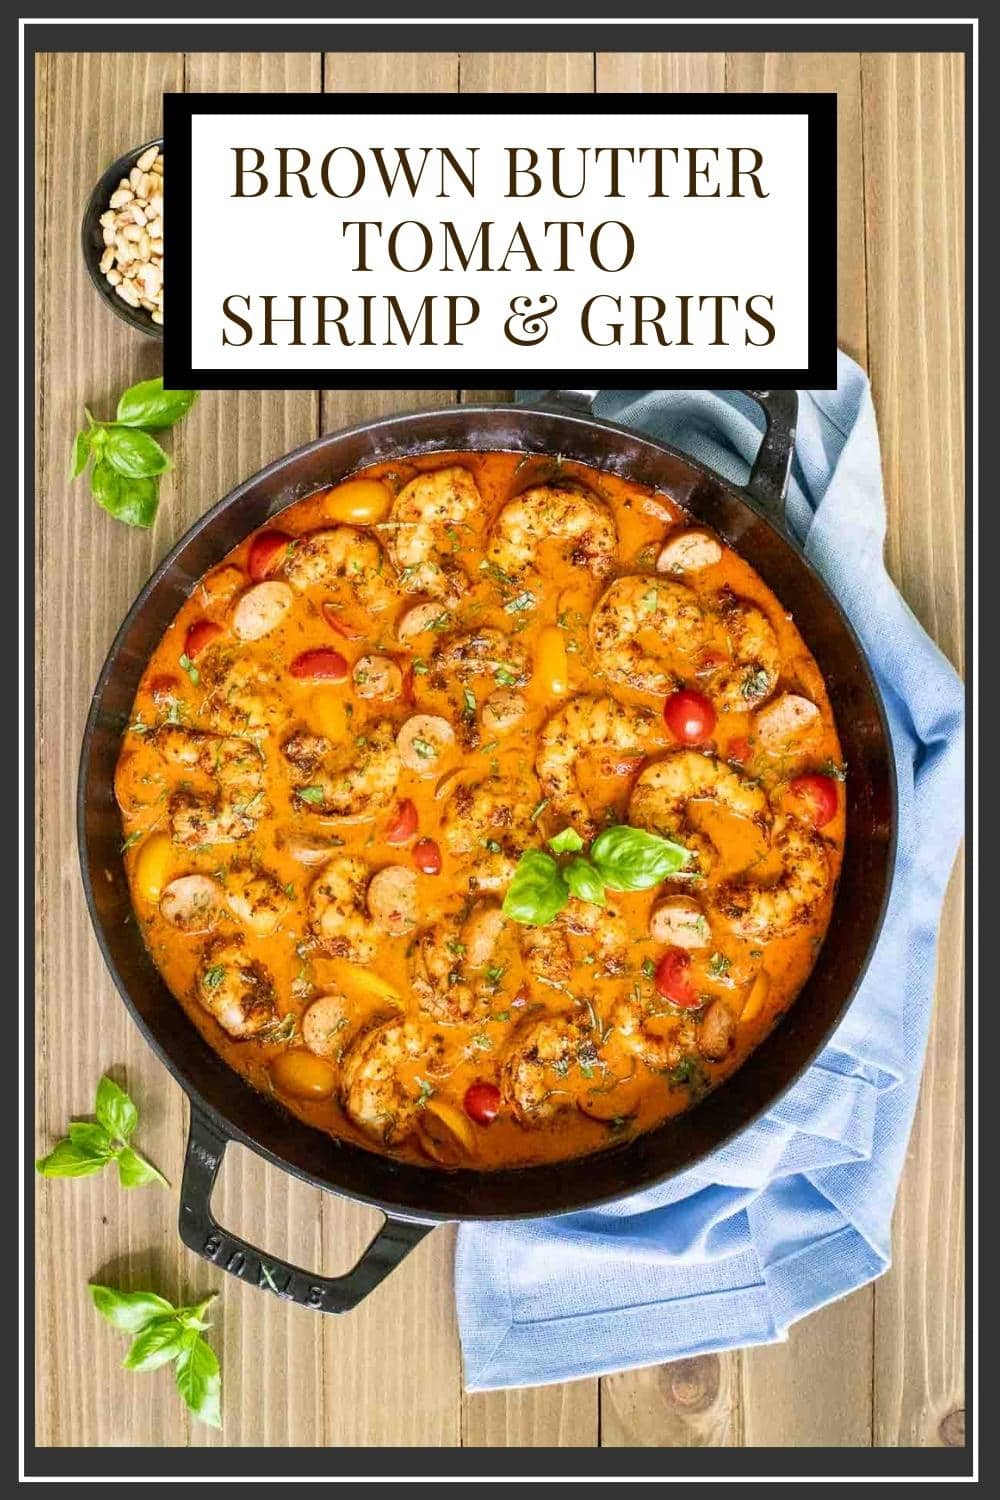 Brown Butter Tomato Shrimp and Grits